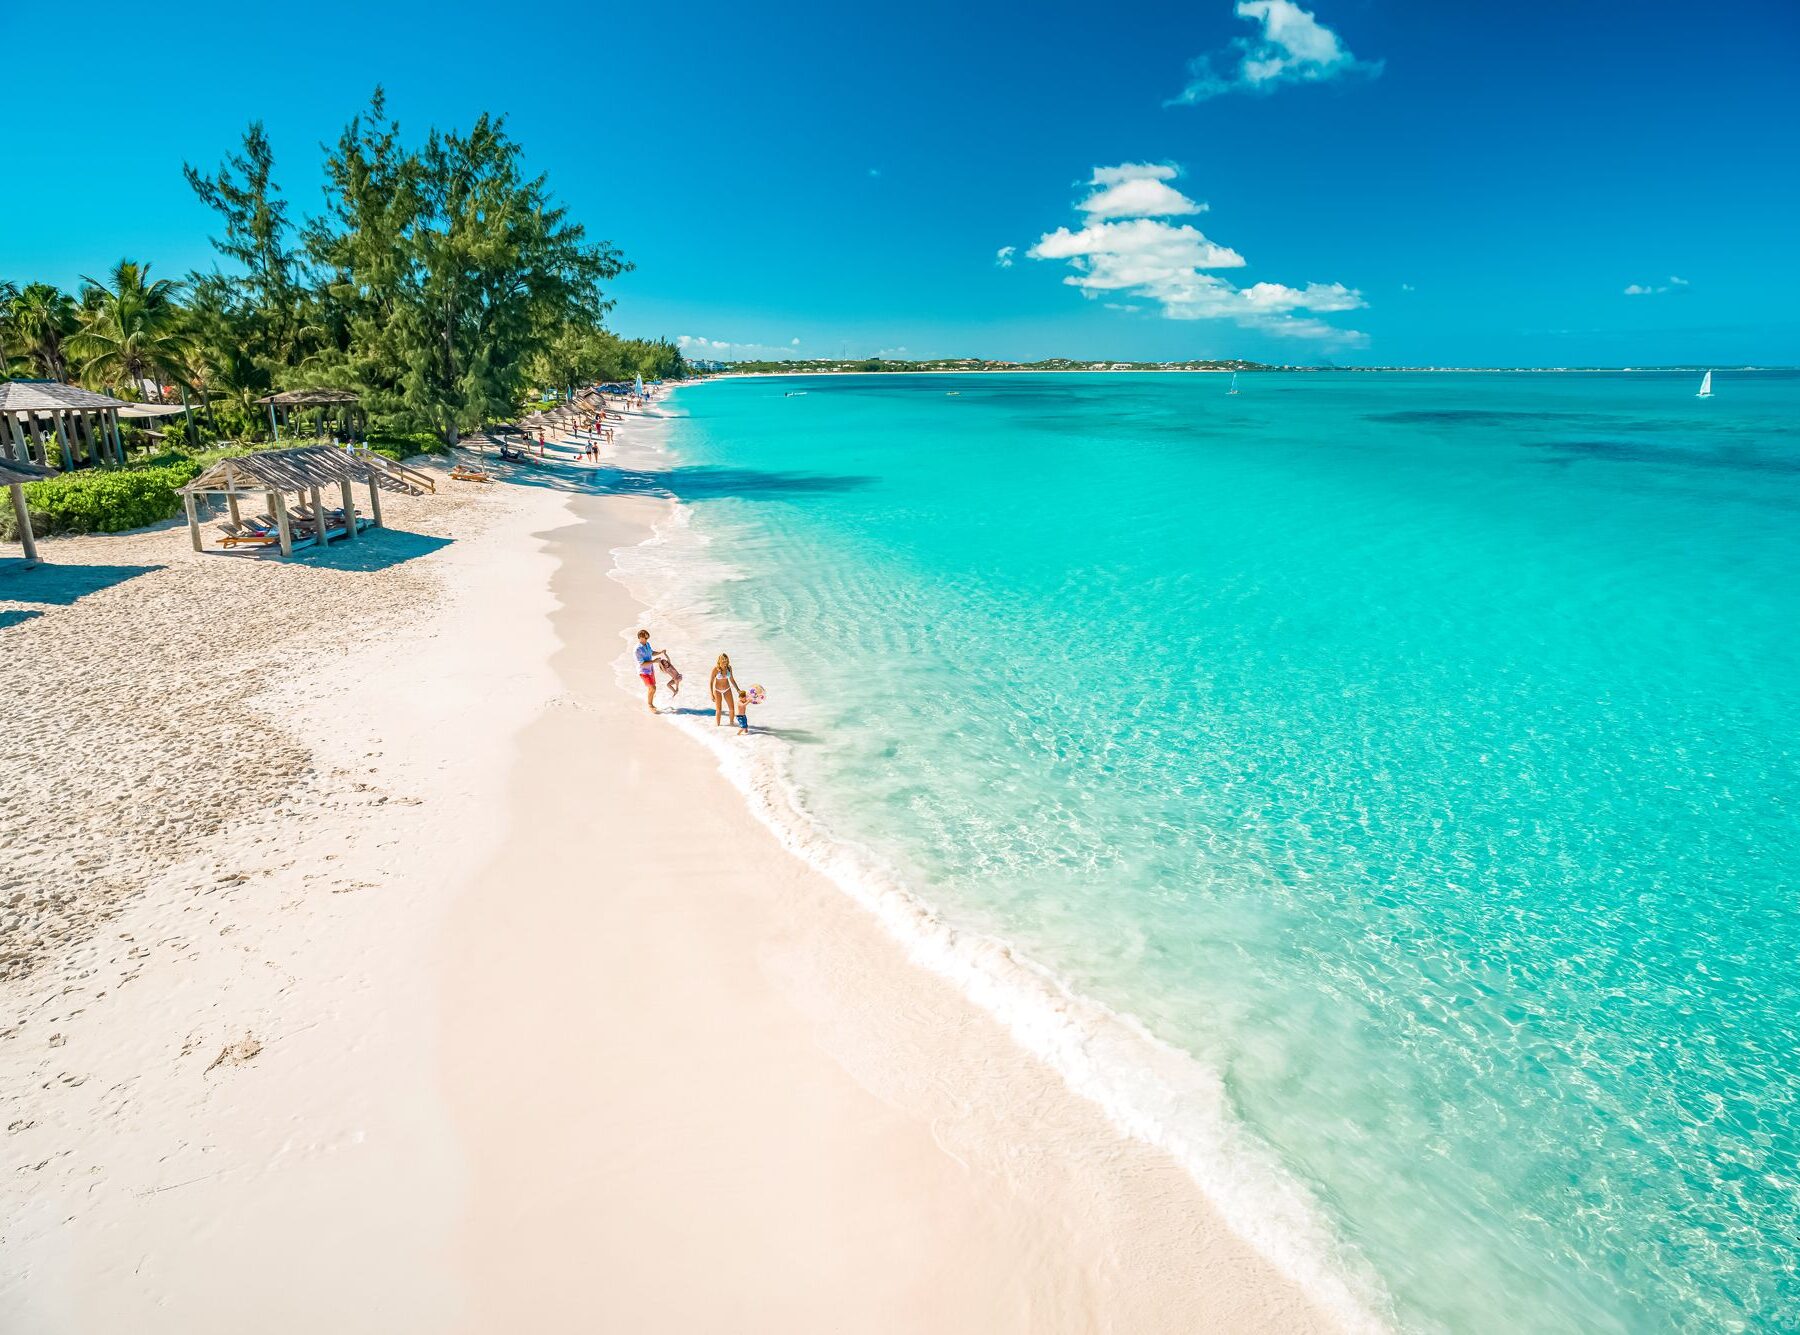 Virgin Atlantic's New Route to Turks and Caicos